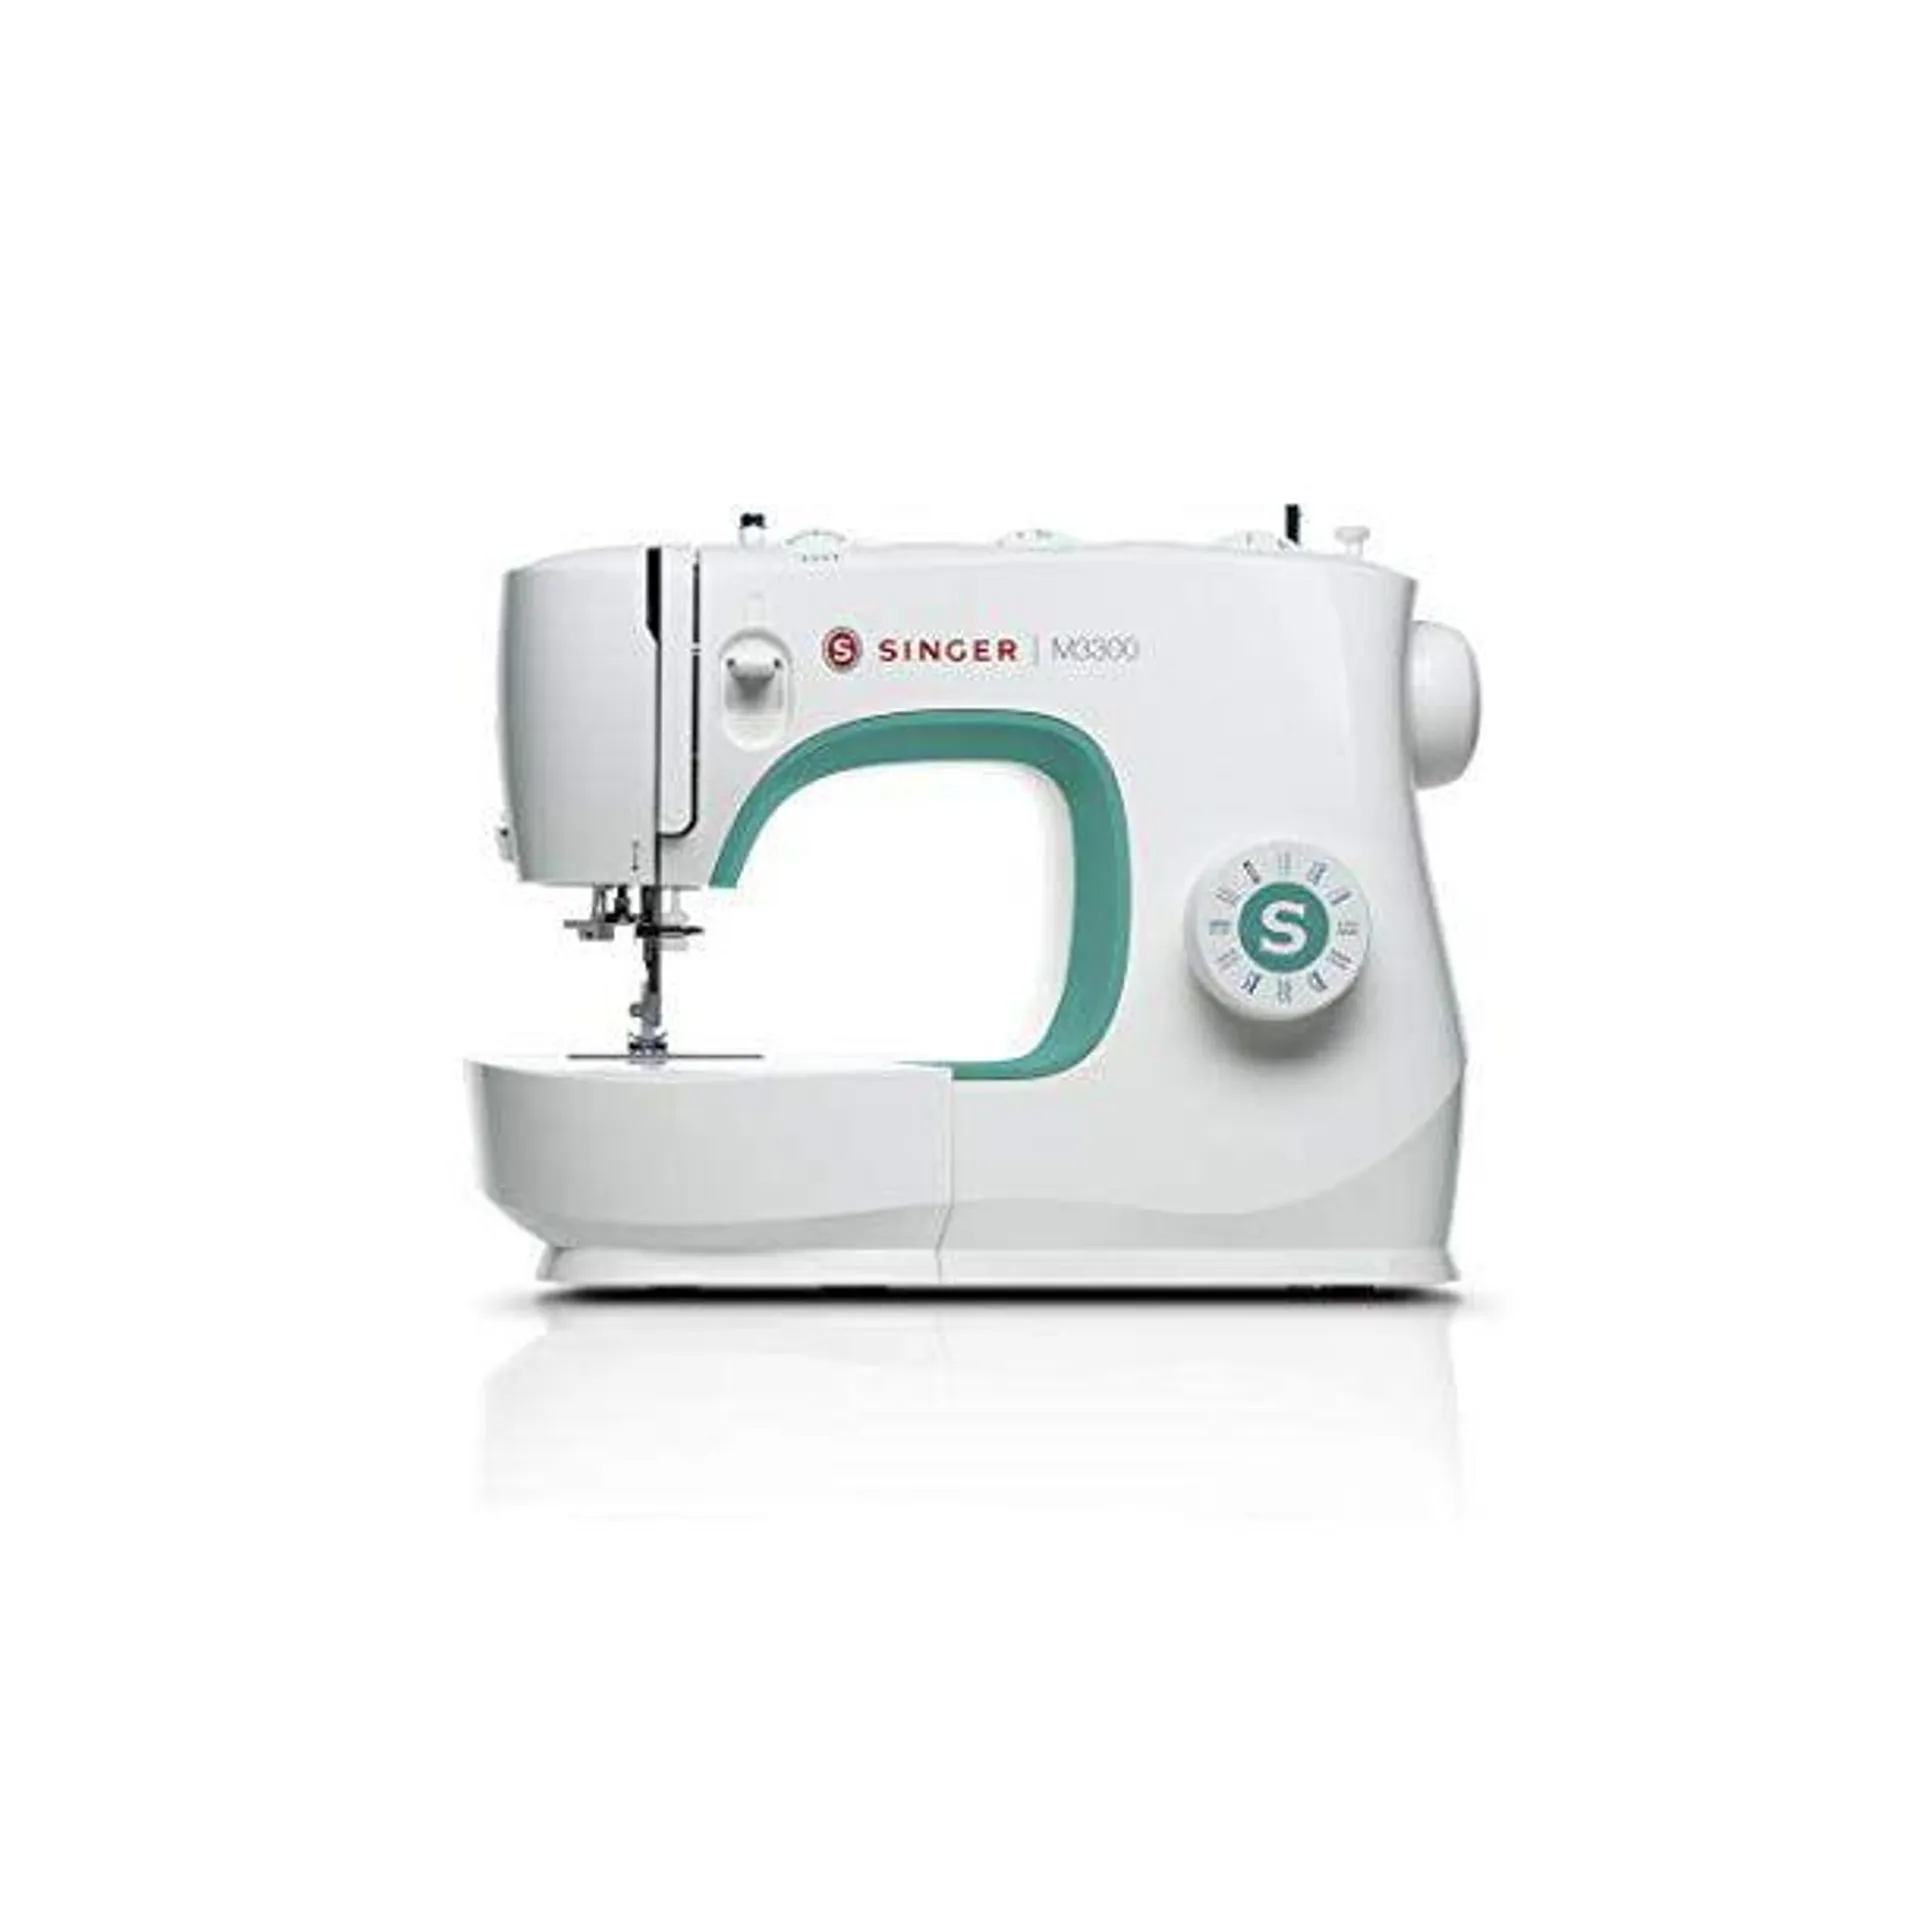 Singer M3300 Sewing Machine with 1-Step Buttonhole - White